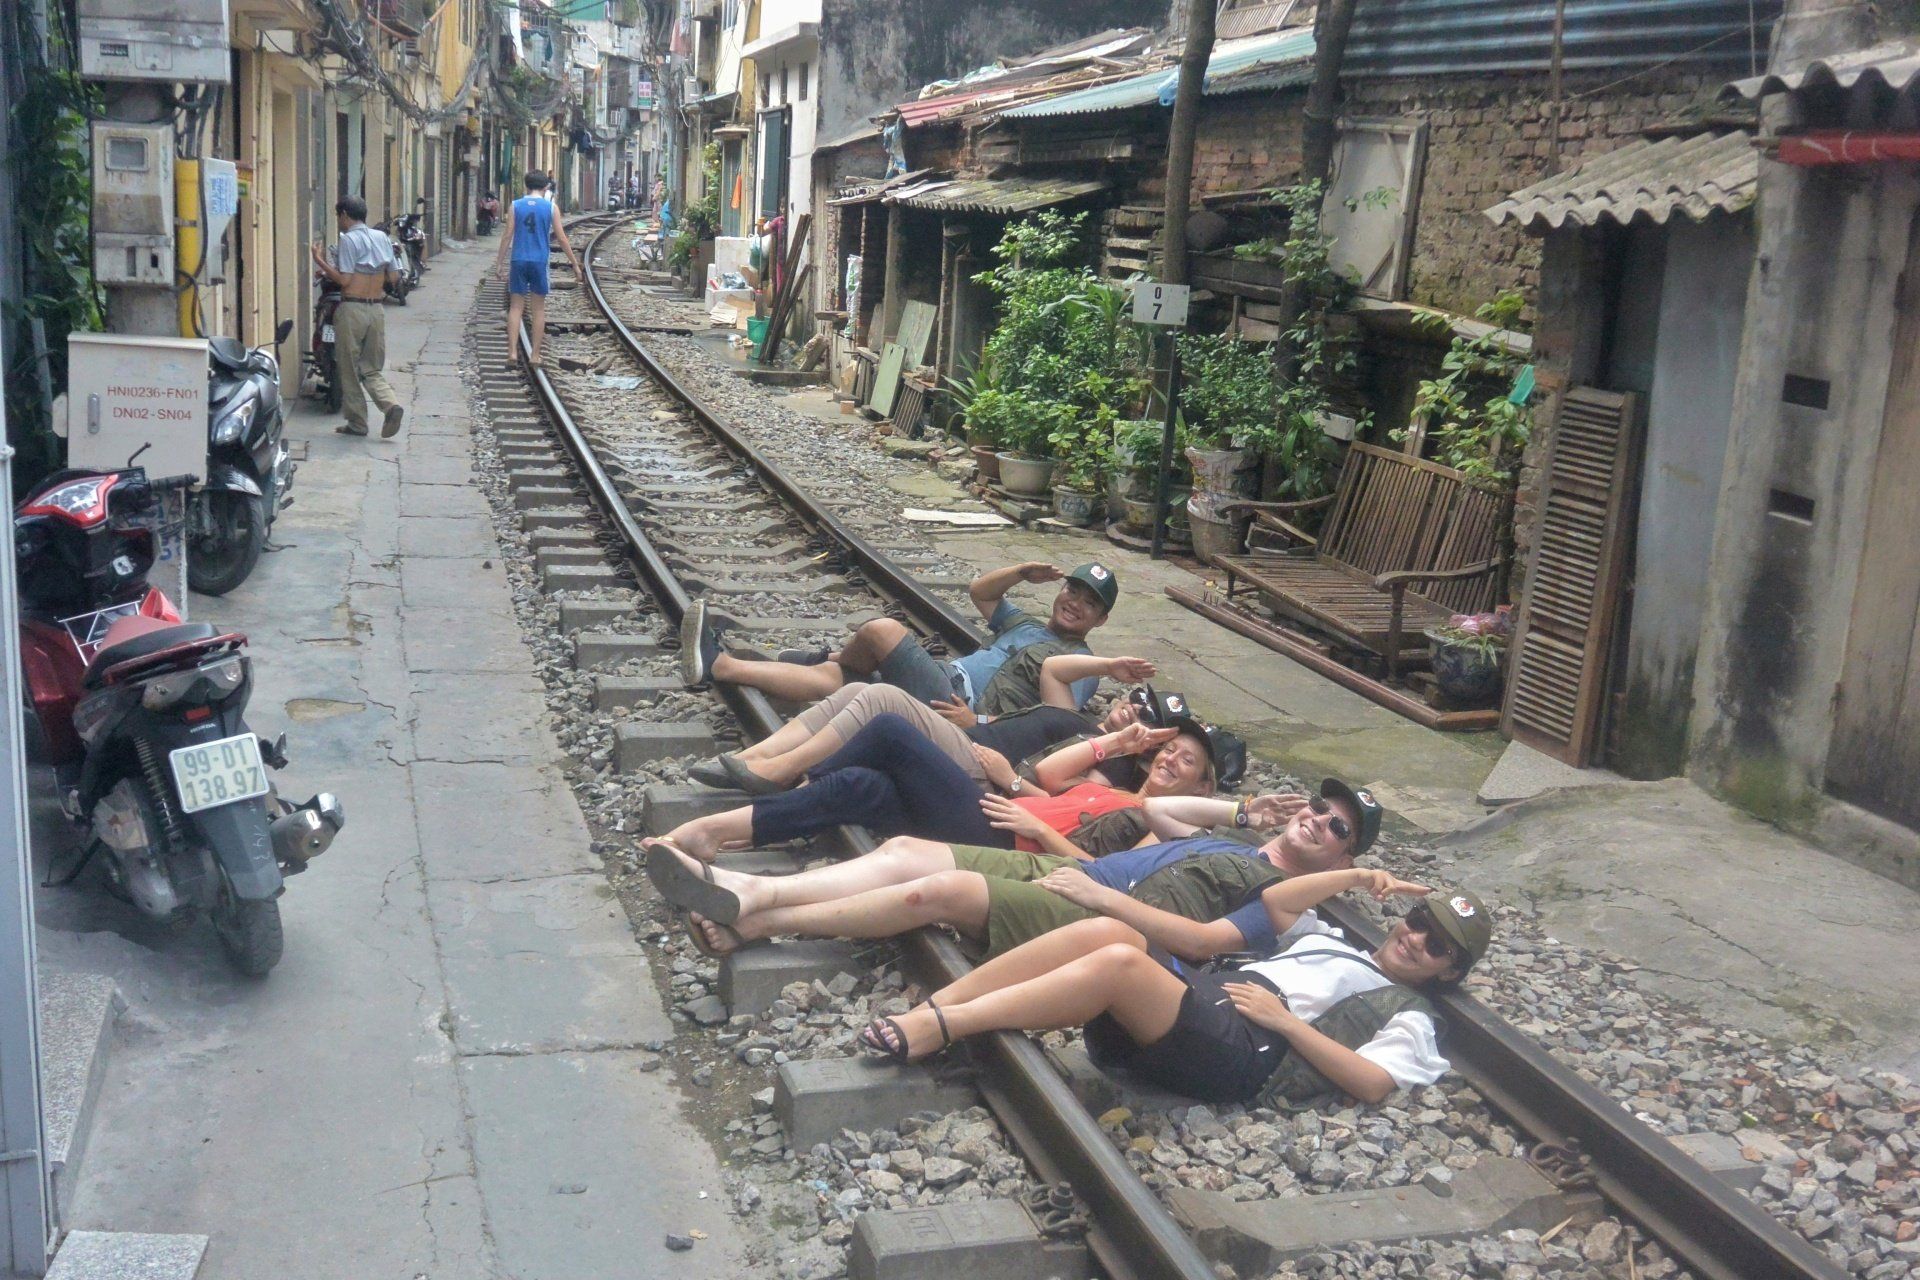 A group of people are laying on train tracks